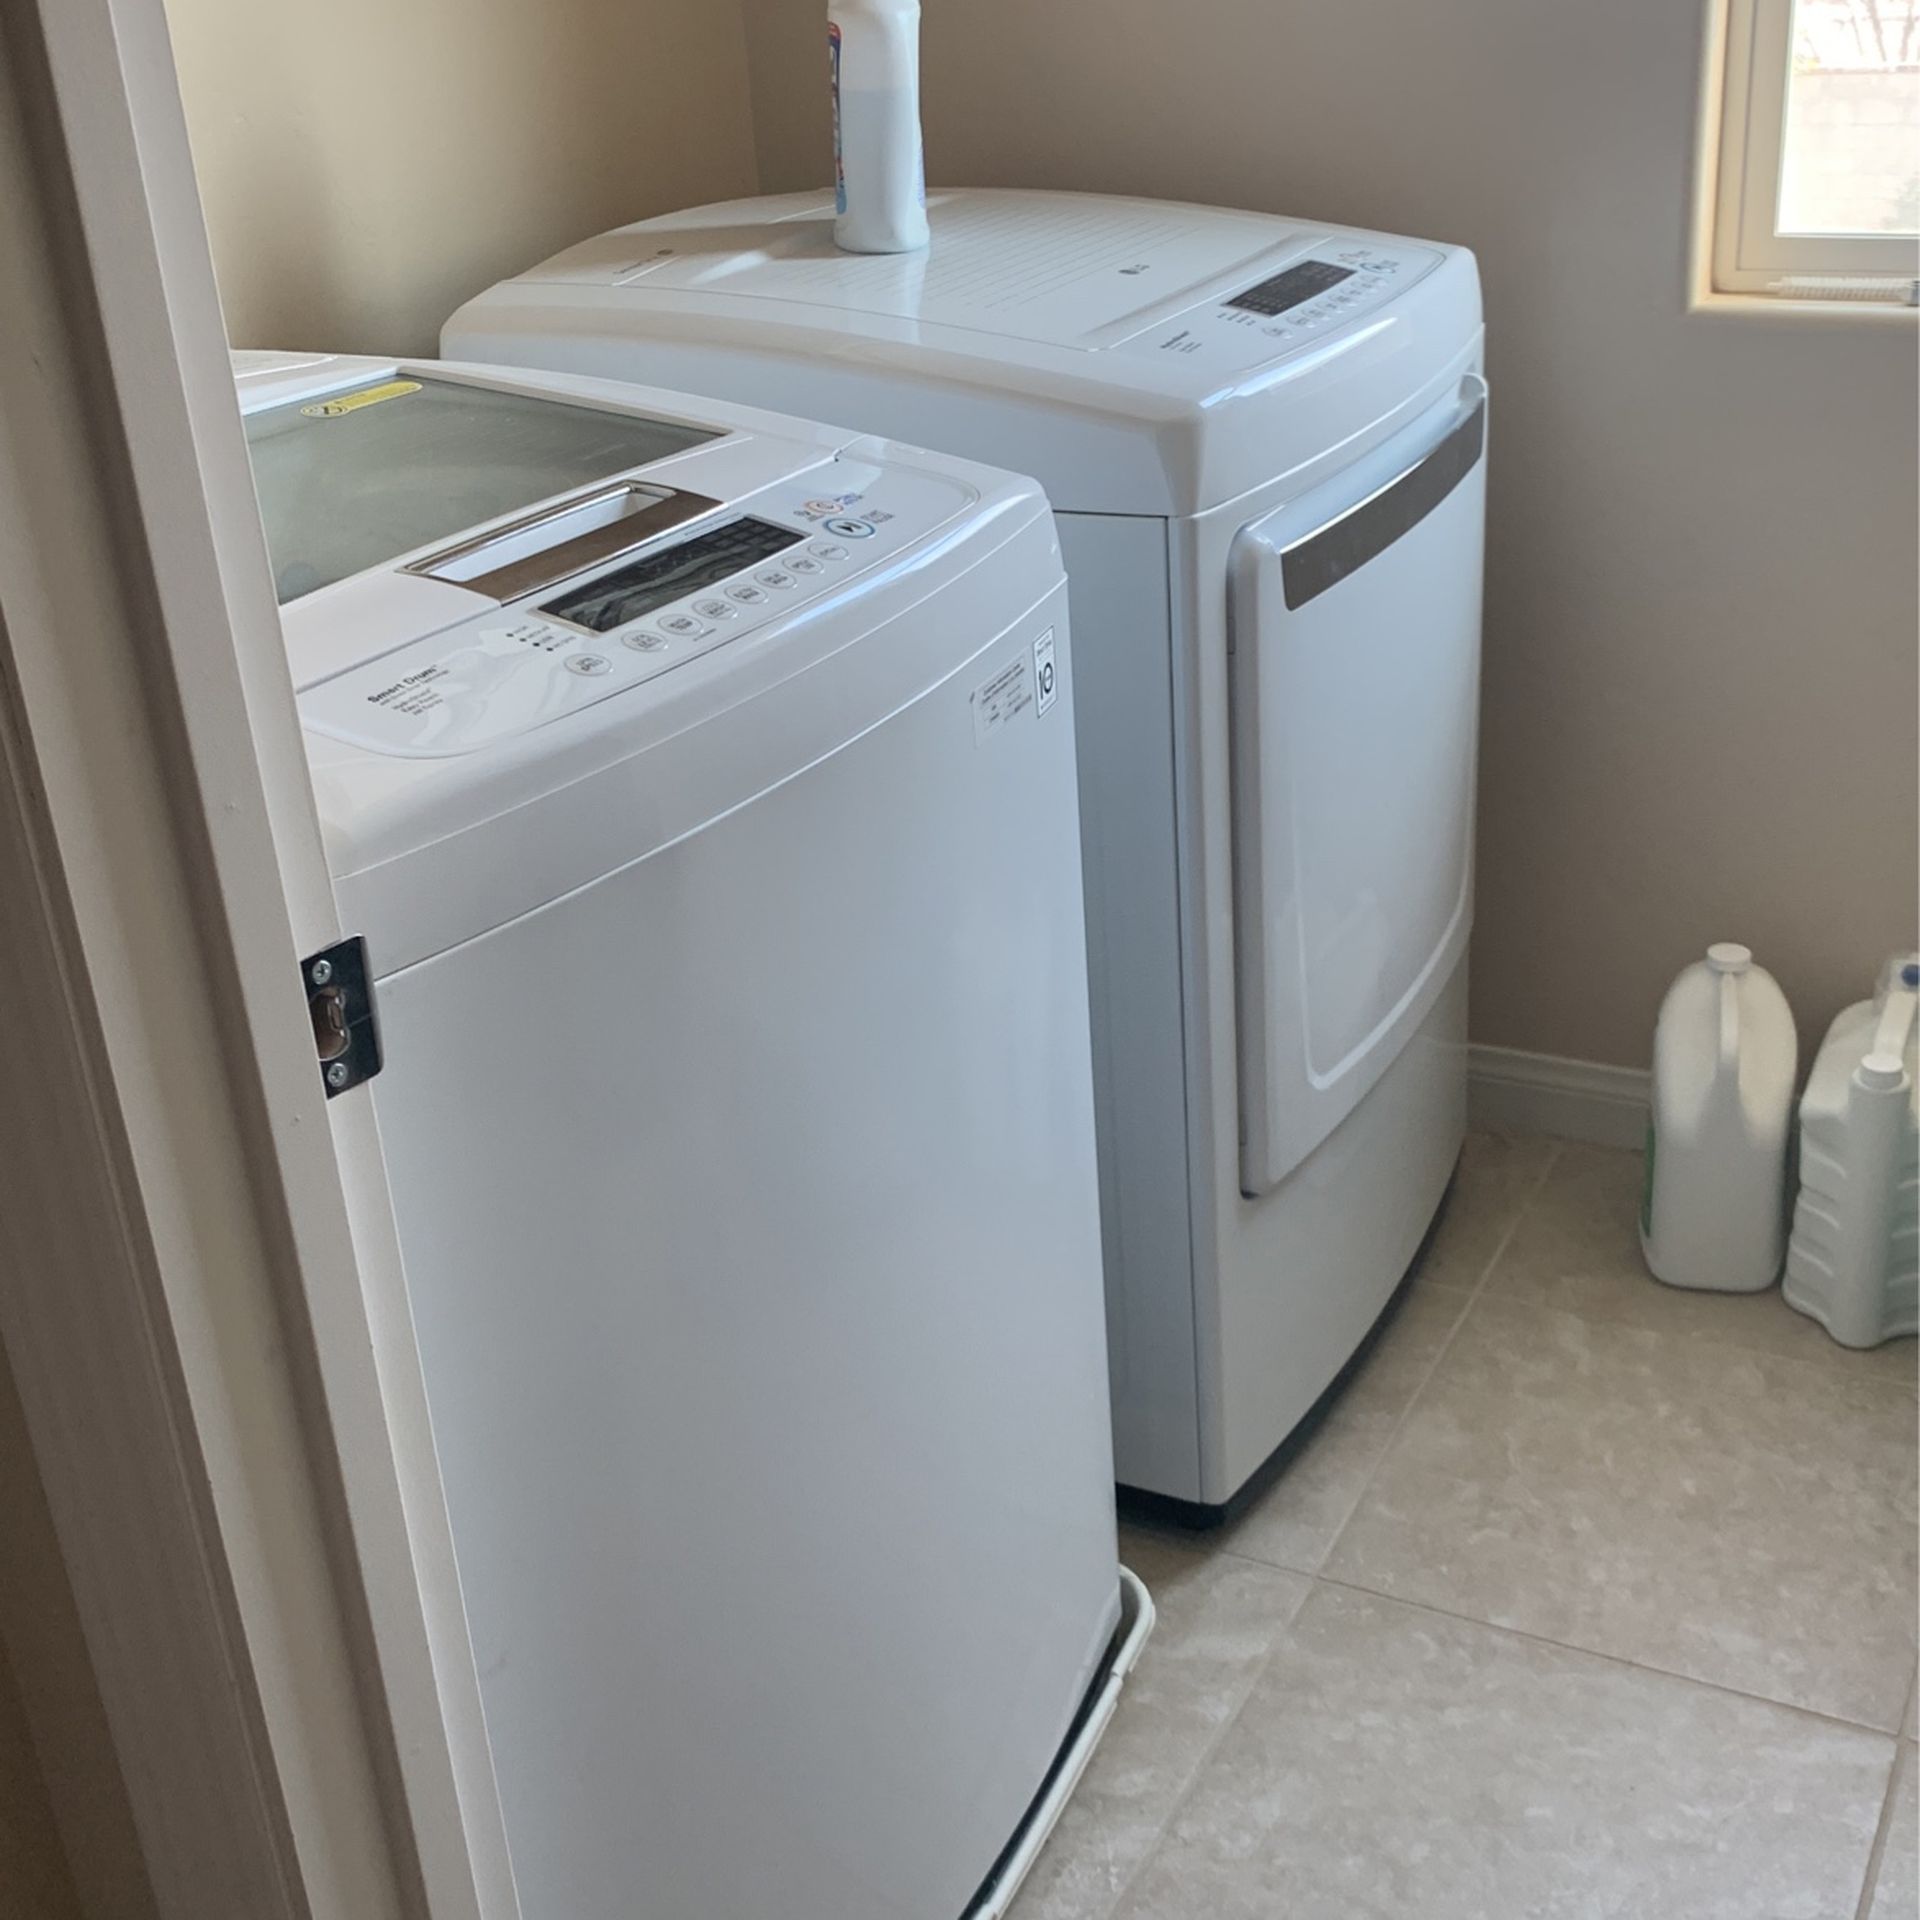 Washer And Dryer LG Jumbo X Large 5 Years Old With 10 Year Warranty , Dryer Is Gas